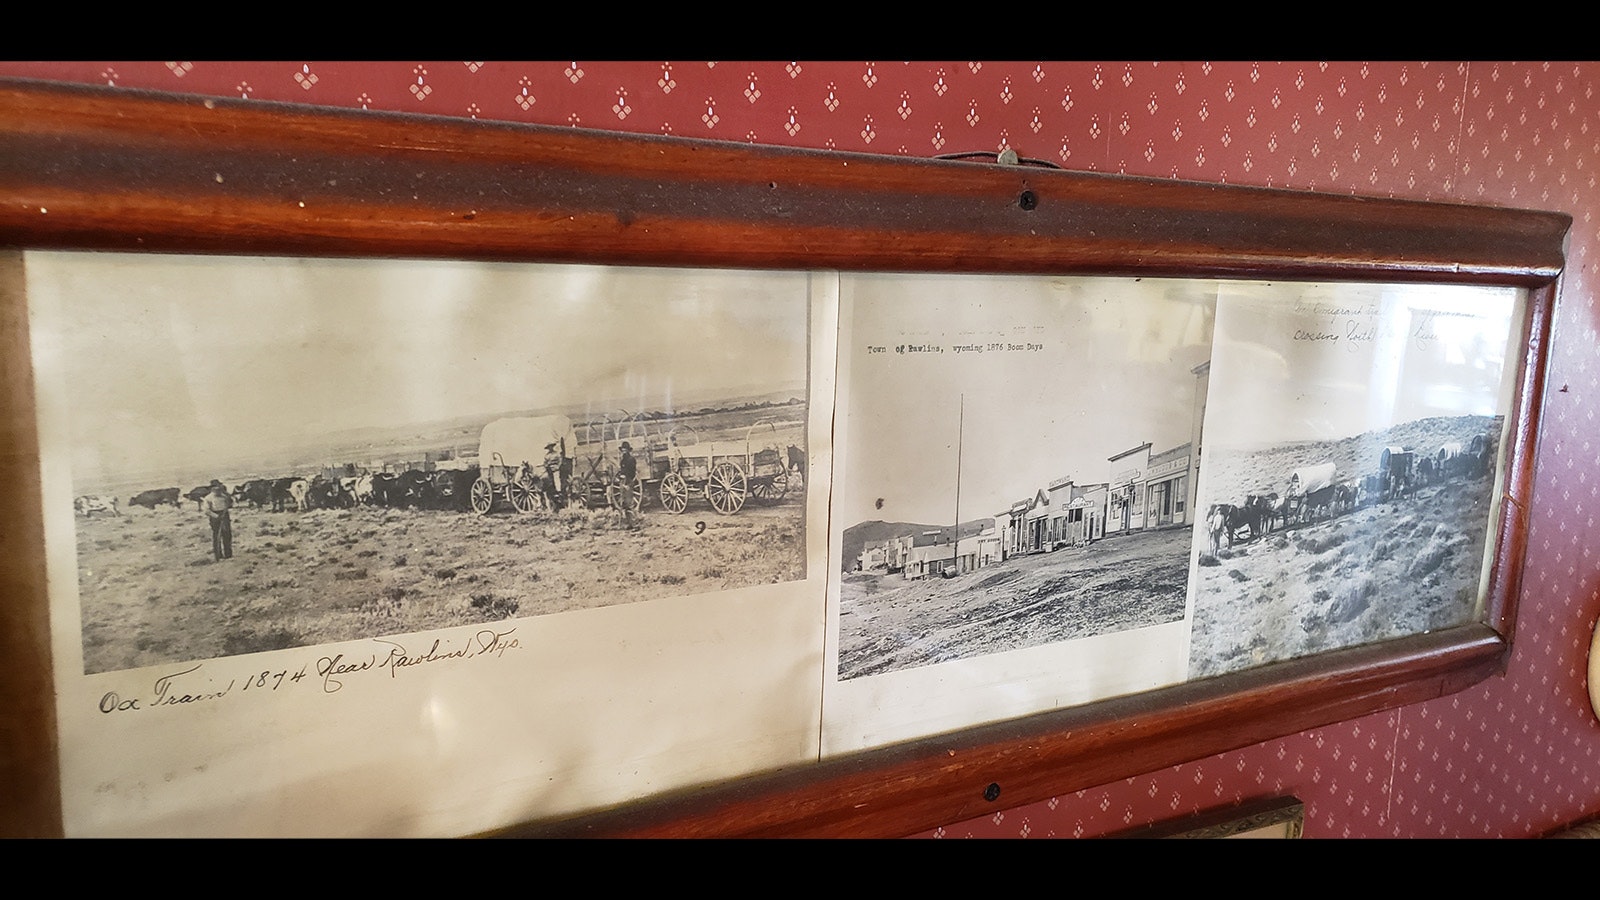 Photos taken near Rawlins during Carbon County's 1876 boom.